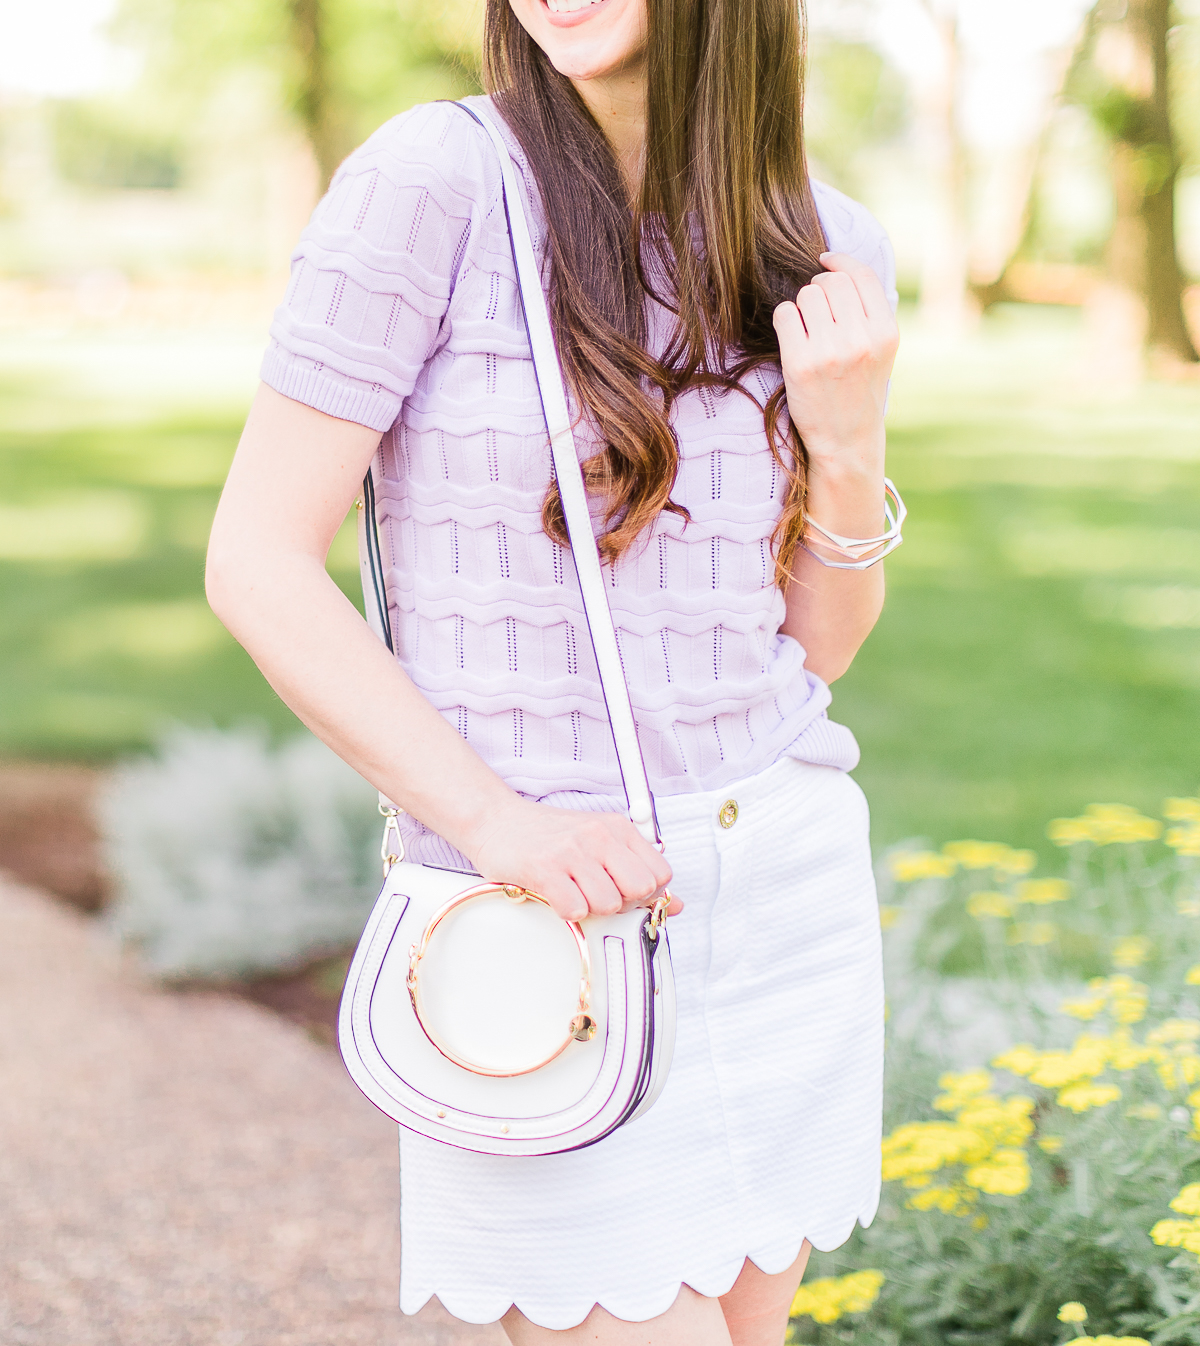 How to wear a short sleeve sweater in the spring by southern fashion blogger Stephanie Ziajka from Diary of a Debutante, lilac Cable Stitch short sleeve sweater, Lilly Pulitzer scalloped mini skirt, white Chloe Nile dupe bag, Chloe dupe bags, Kendra Scott mixed metal bangle set